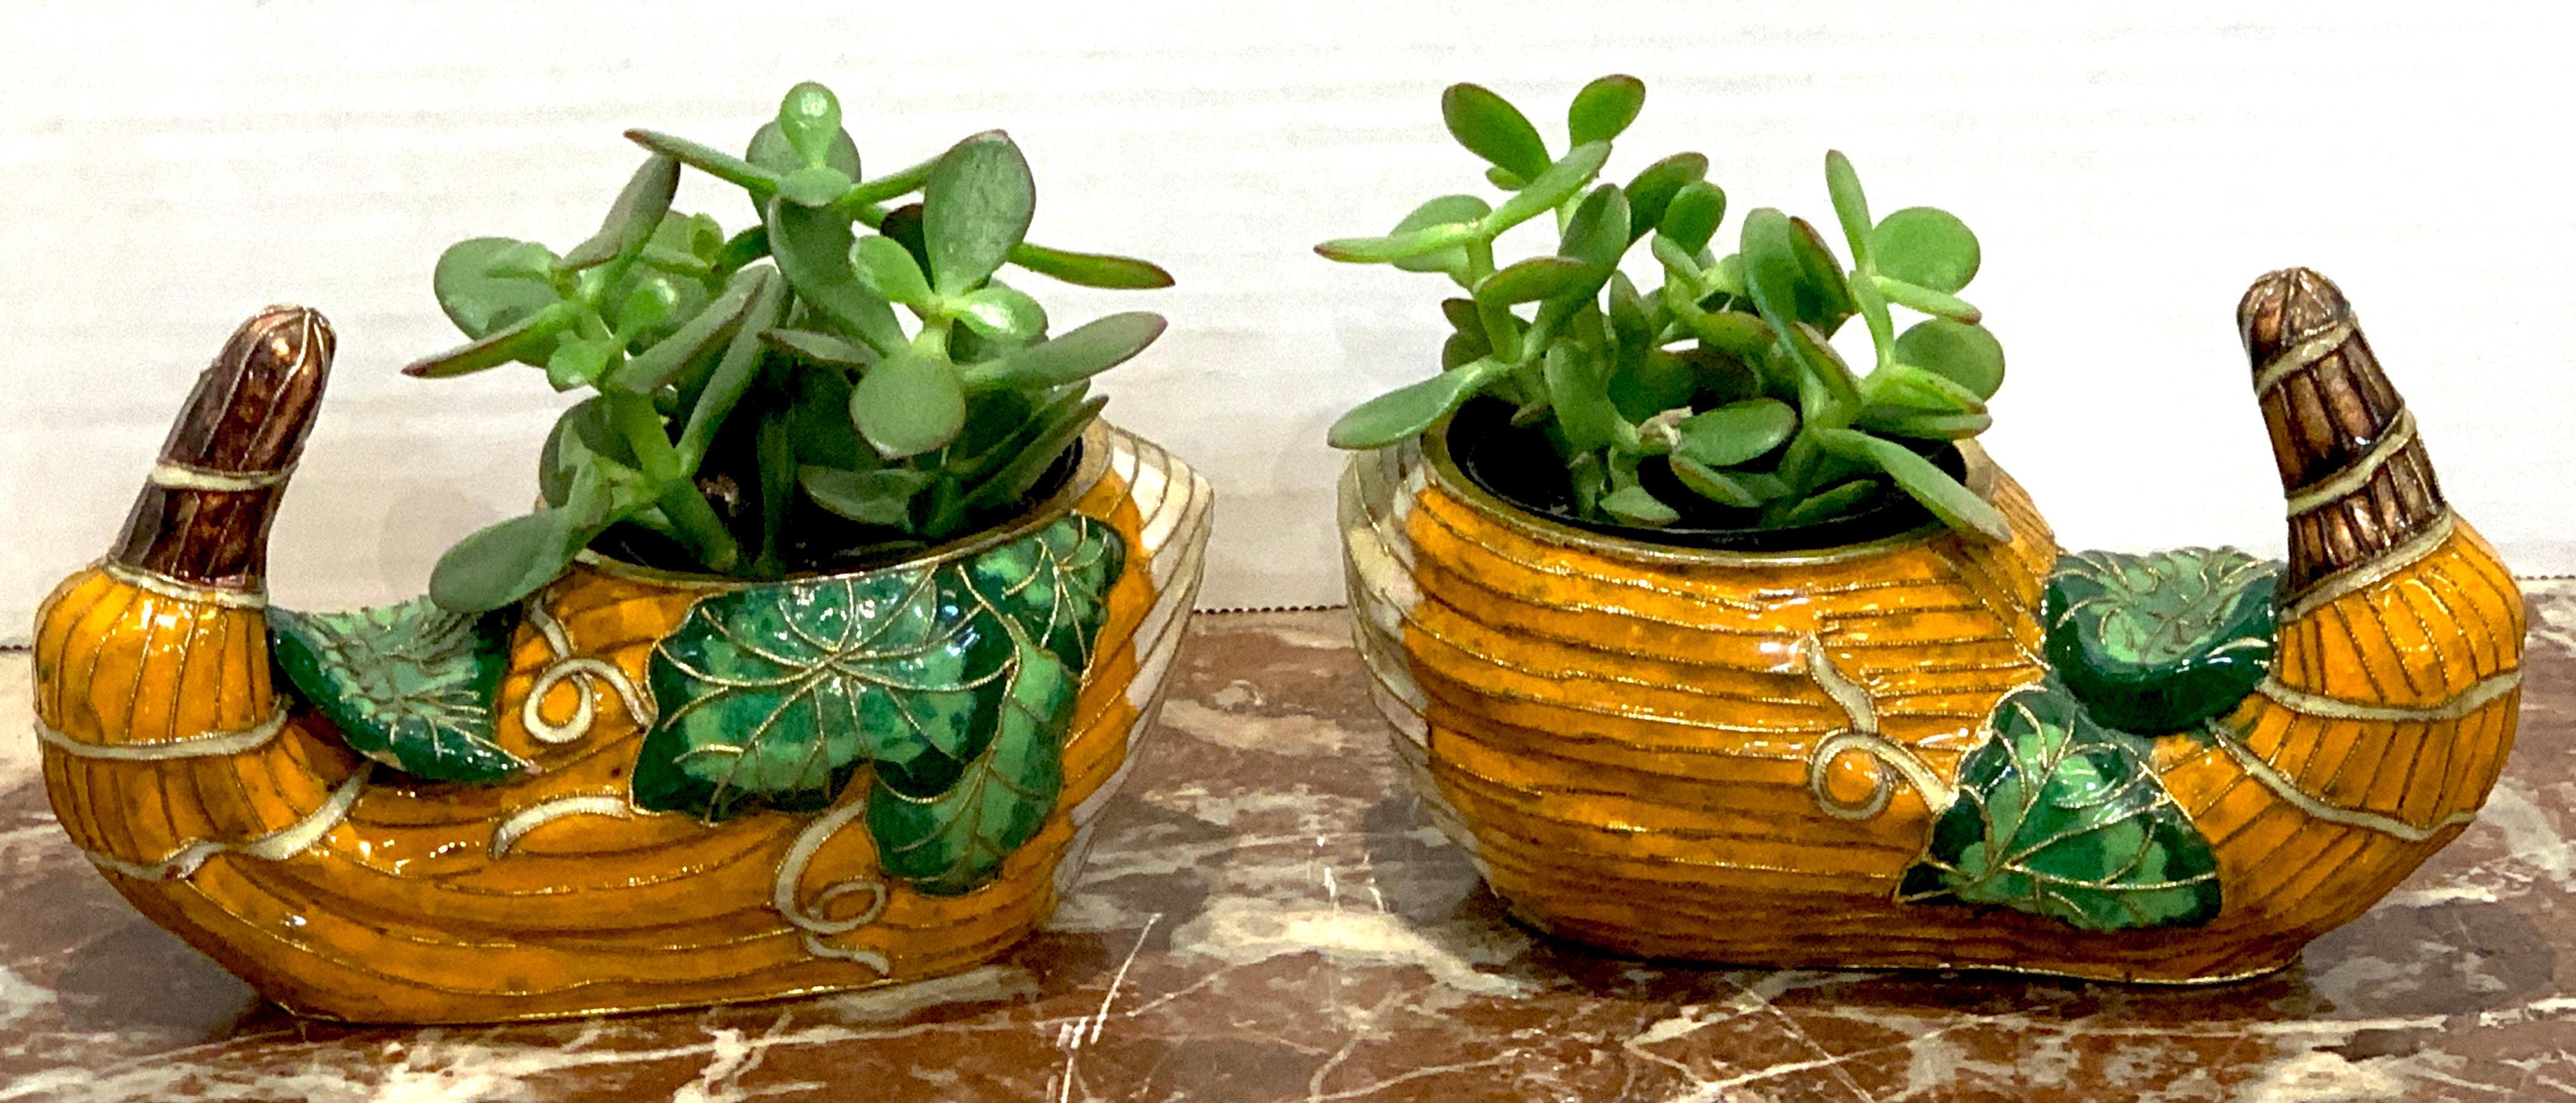 Pair of Chinese Export enamel gourd cachepots, Each one realistically cast and modeled. Gold plated copper base. Shown with jade plants, not included. 2.5